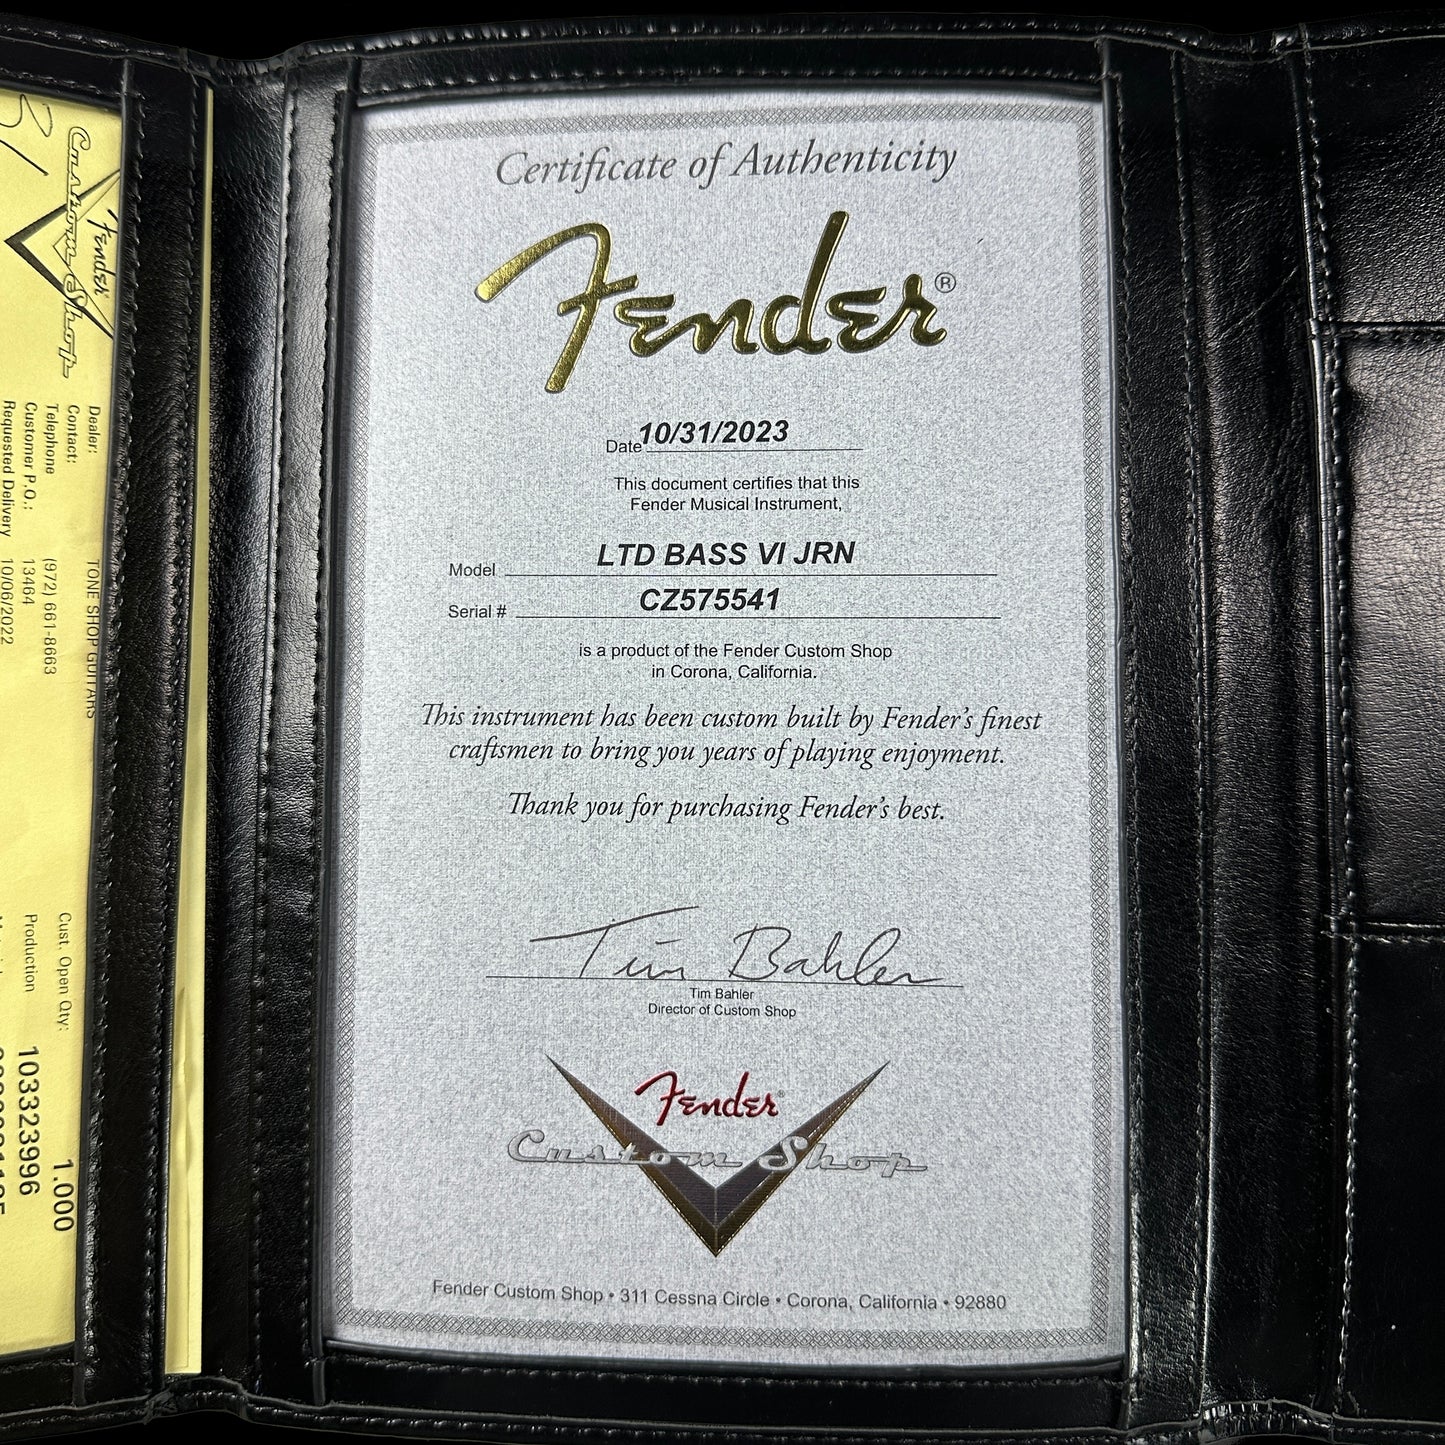 Certificate of authenticity for Fender Custom Shop Limited Edition Bass VI Journeyman Relic Aged Aztec Gold.